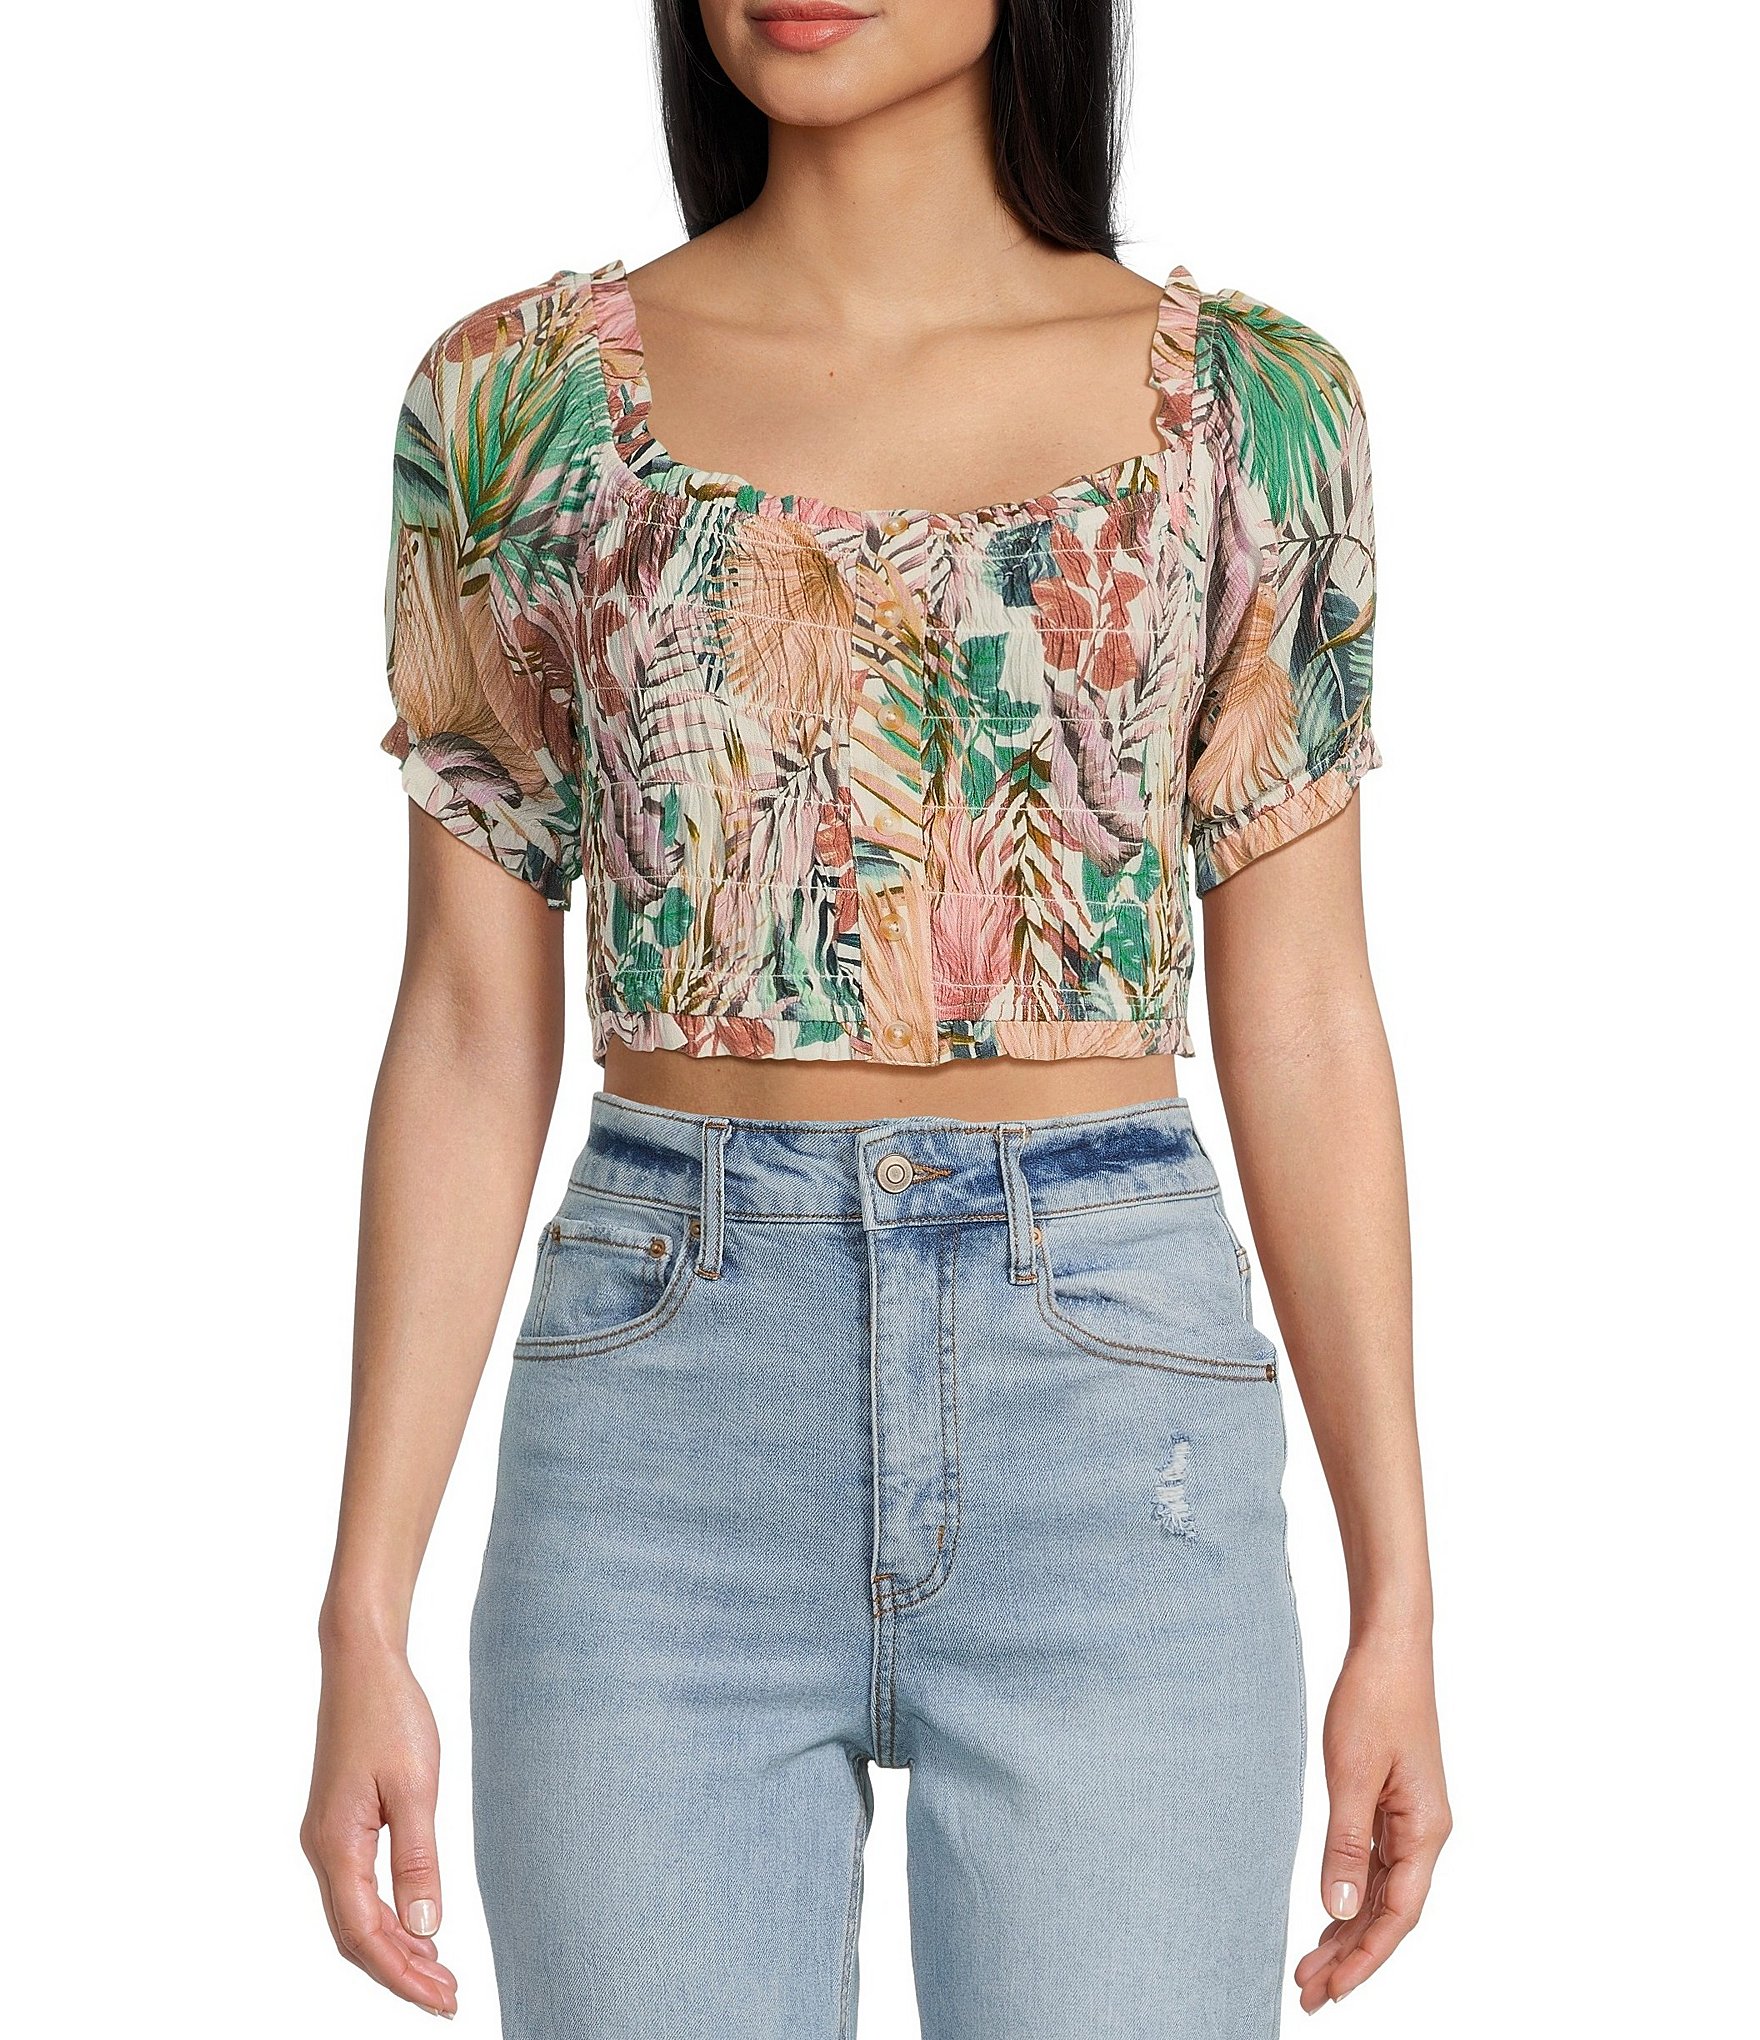 Hurley Palmetto Sunset Floral Print Short Puff Sleeve Smocked Crop